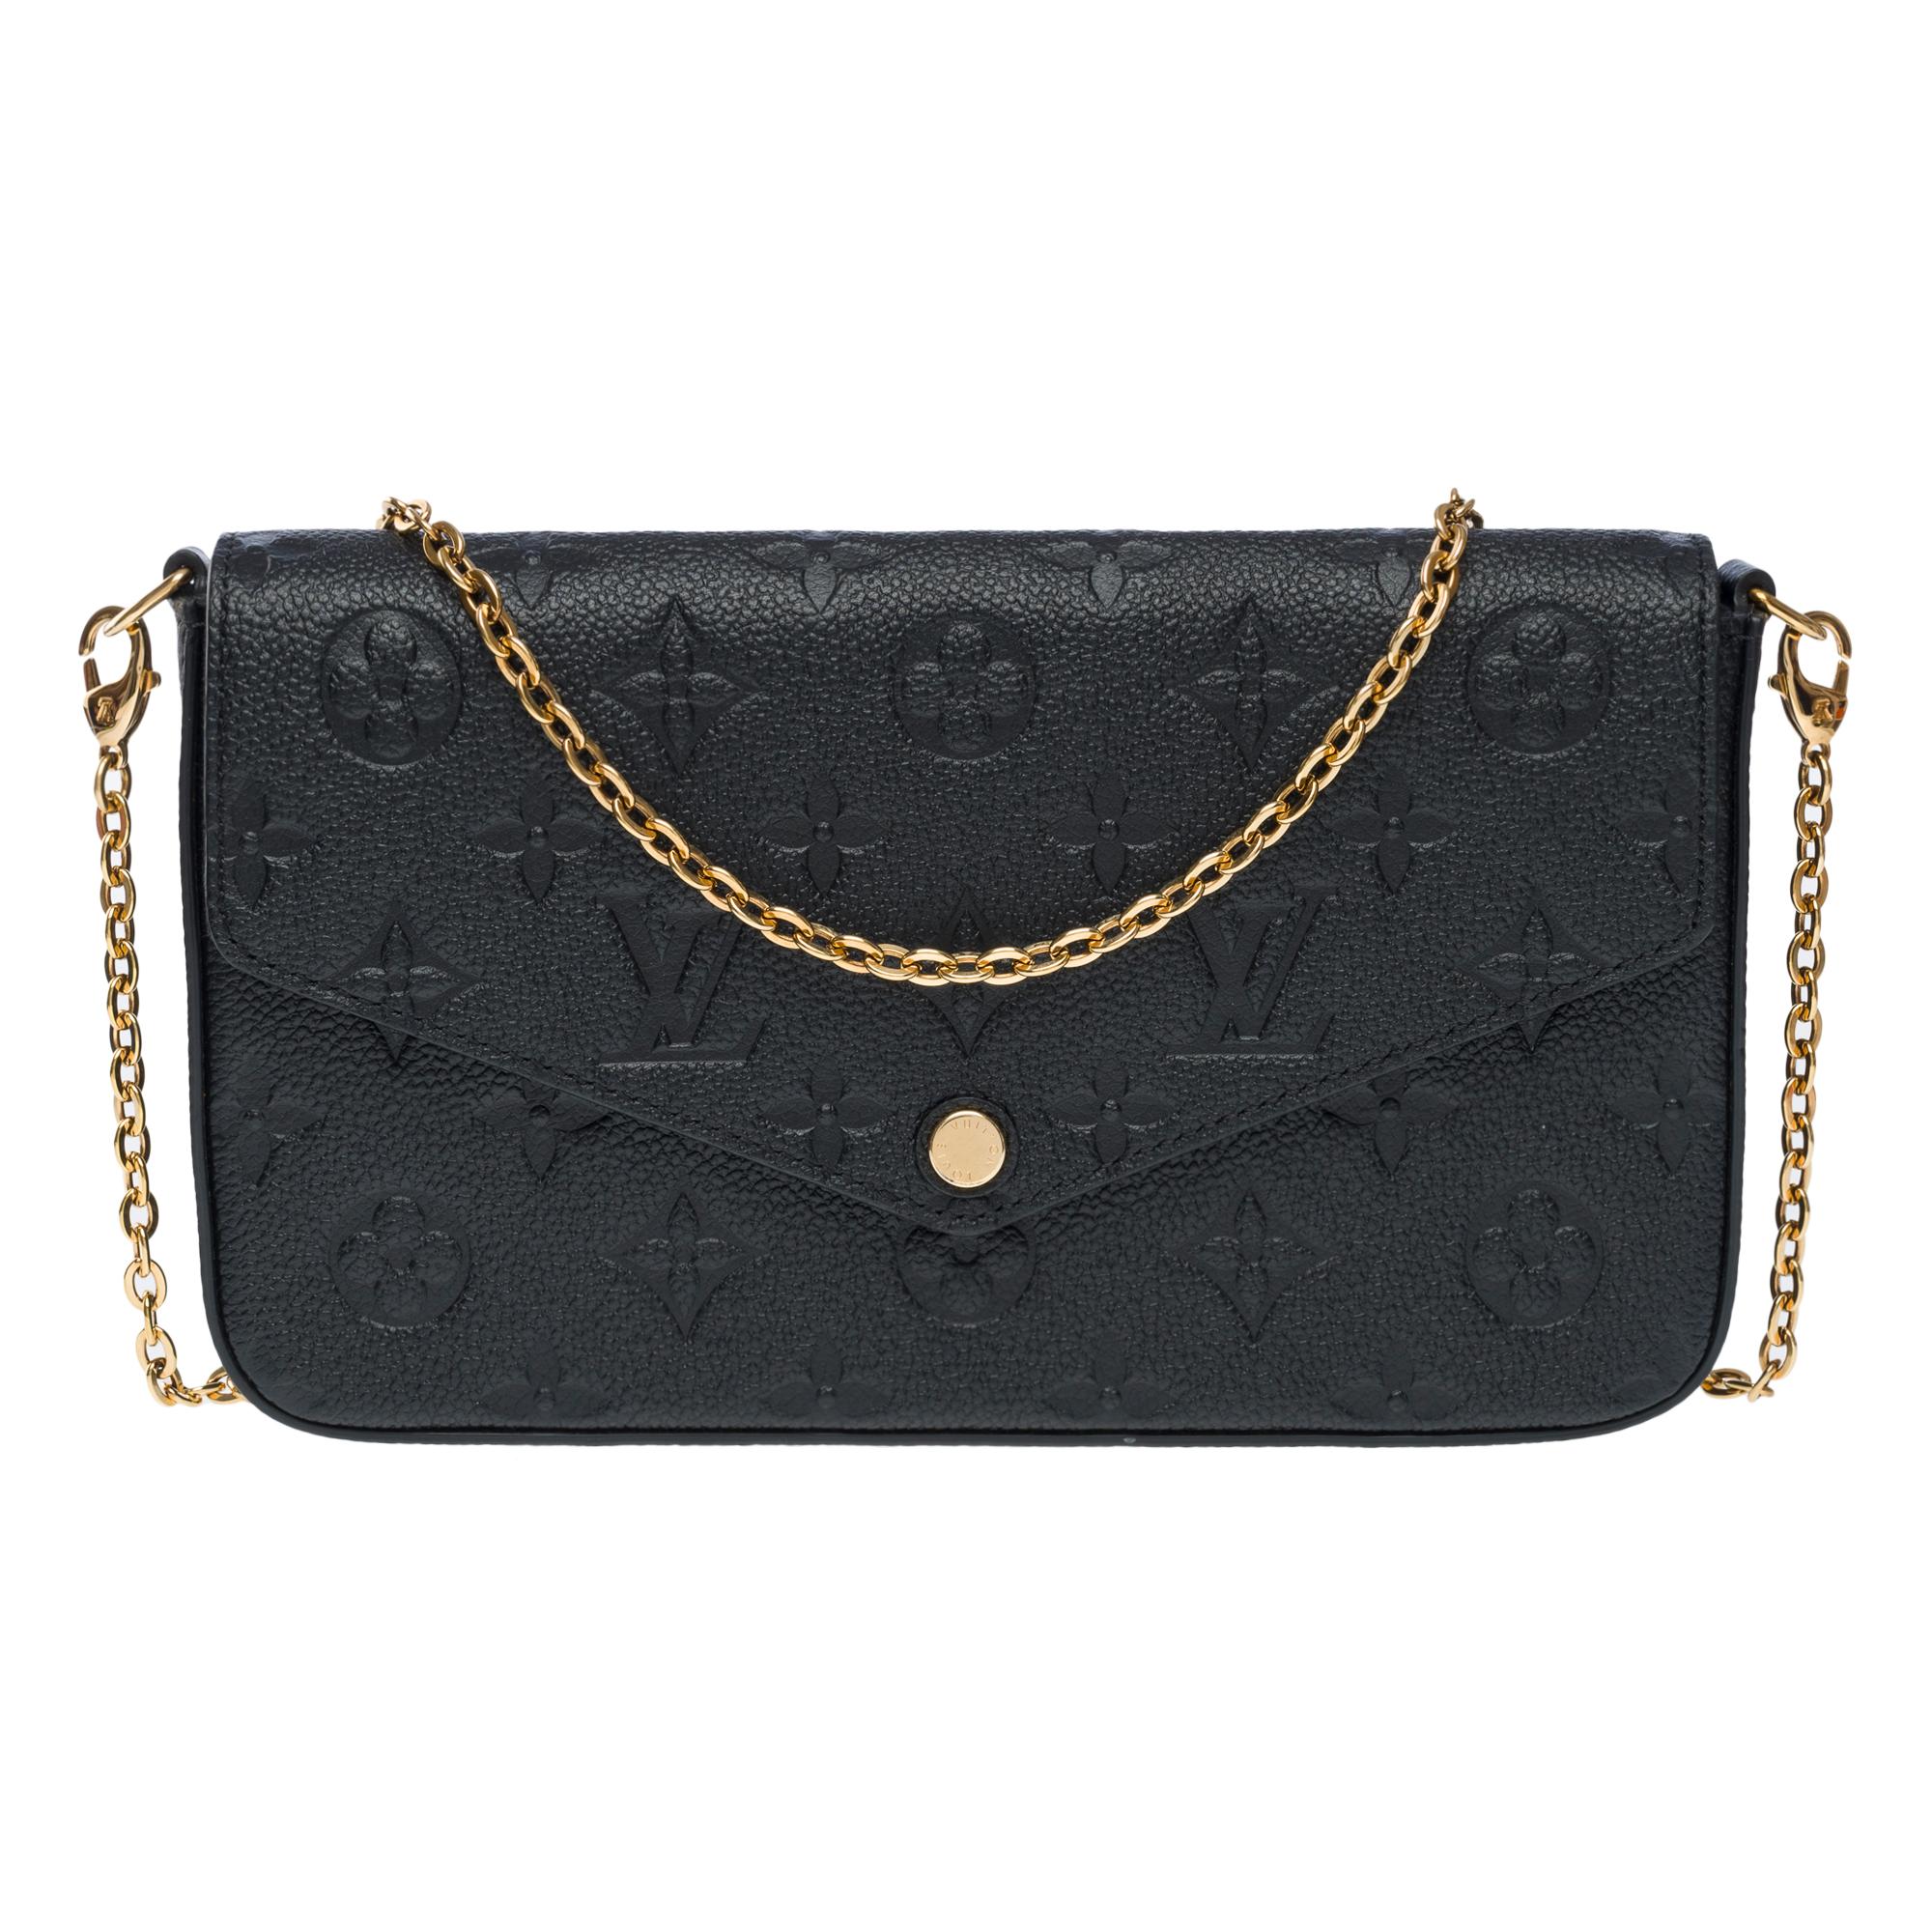 Crafted​ ​from​ ​Monogram​ ​Empreinte​ ​leather,​ ​this​ ​Félicie​ ​Pochette​ ​is​ ​embossed​ ​with​ ​the​ ​House’s​ ​iconic​ ​Monogram​ ​motif.​ ​Designed​ ​to​ ​adapt​ ​to​ ​contemporary​ ​lifestyles,​ ​this​ ​flap​ ​model​ ​features​ ​a​